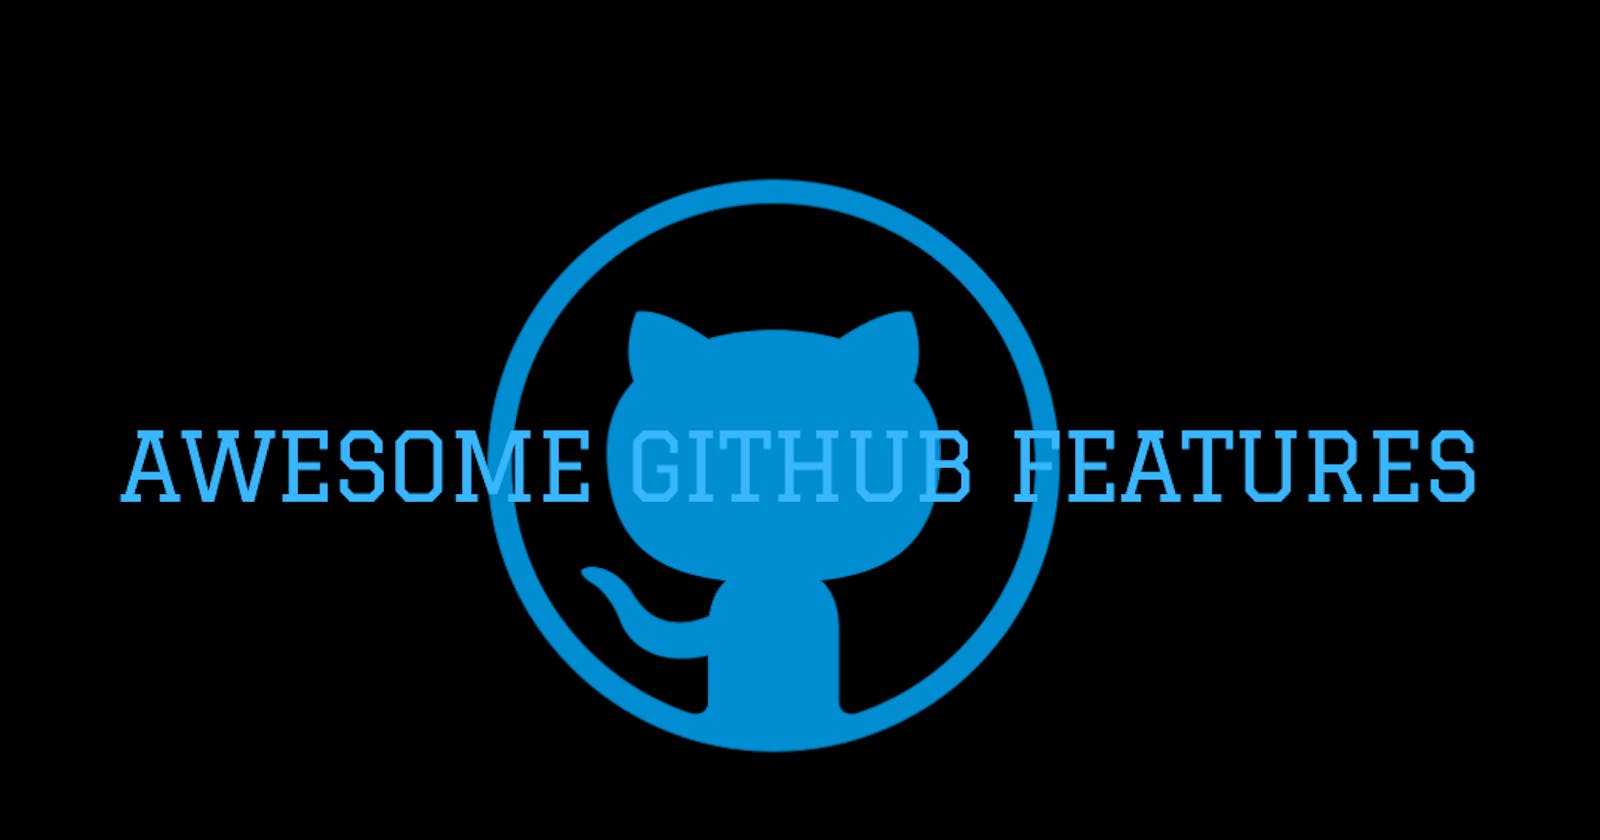 Awesome Github features you likely don't know about